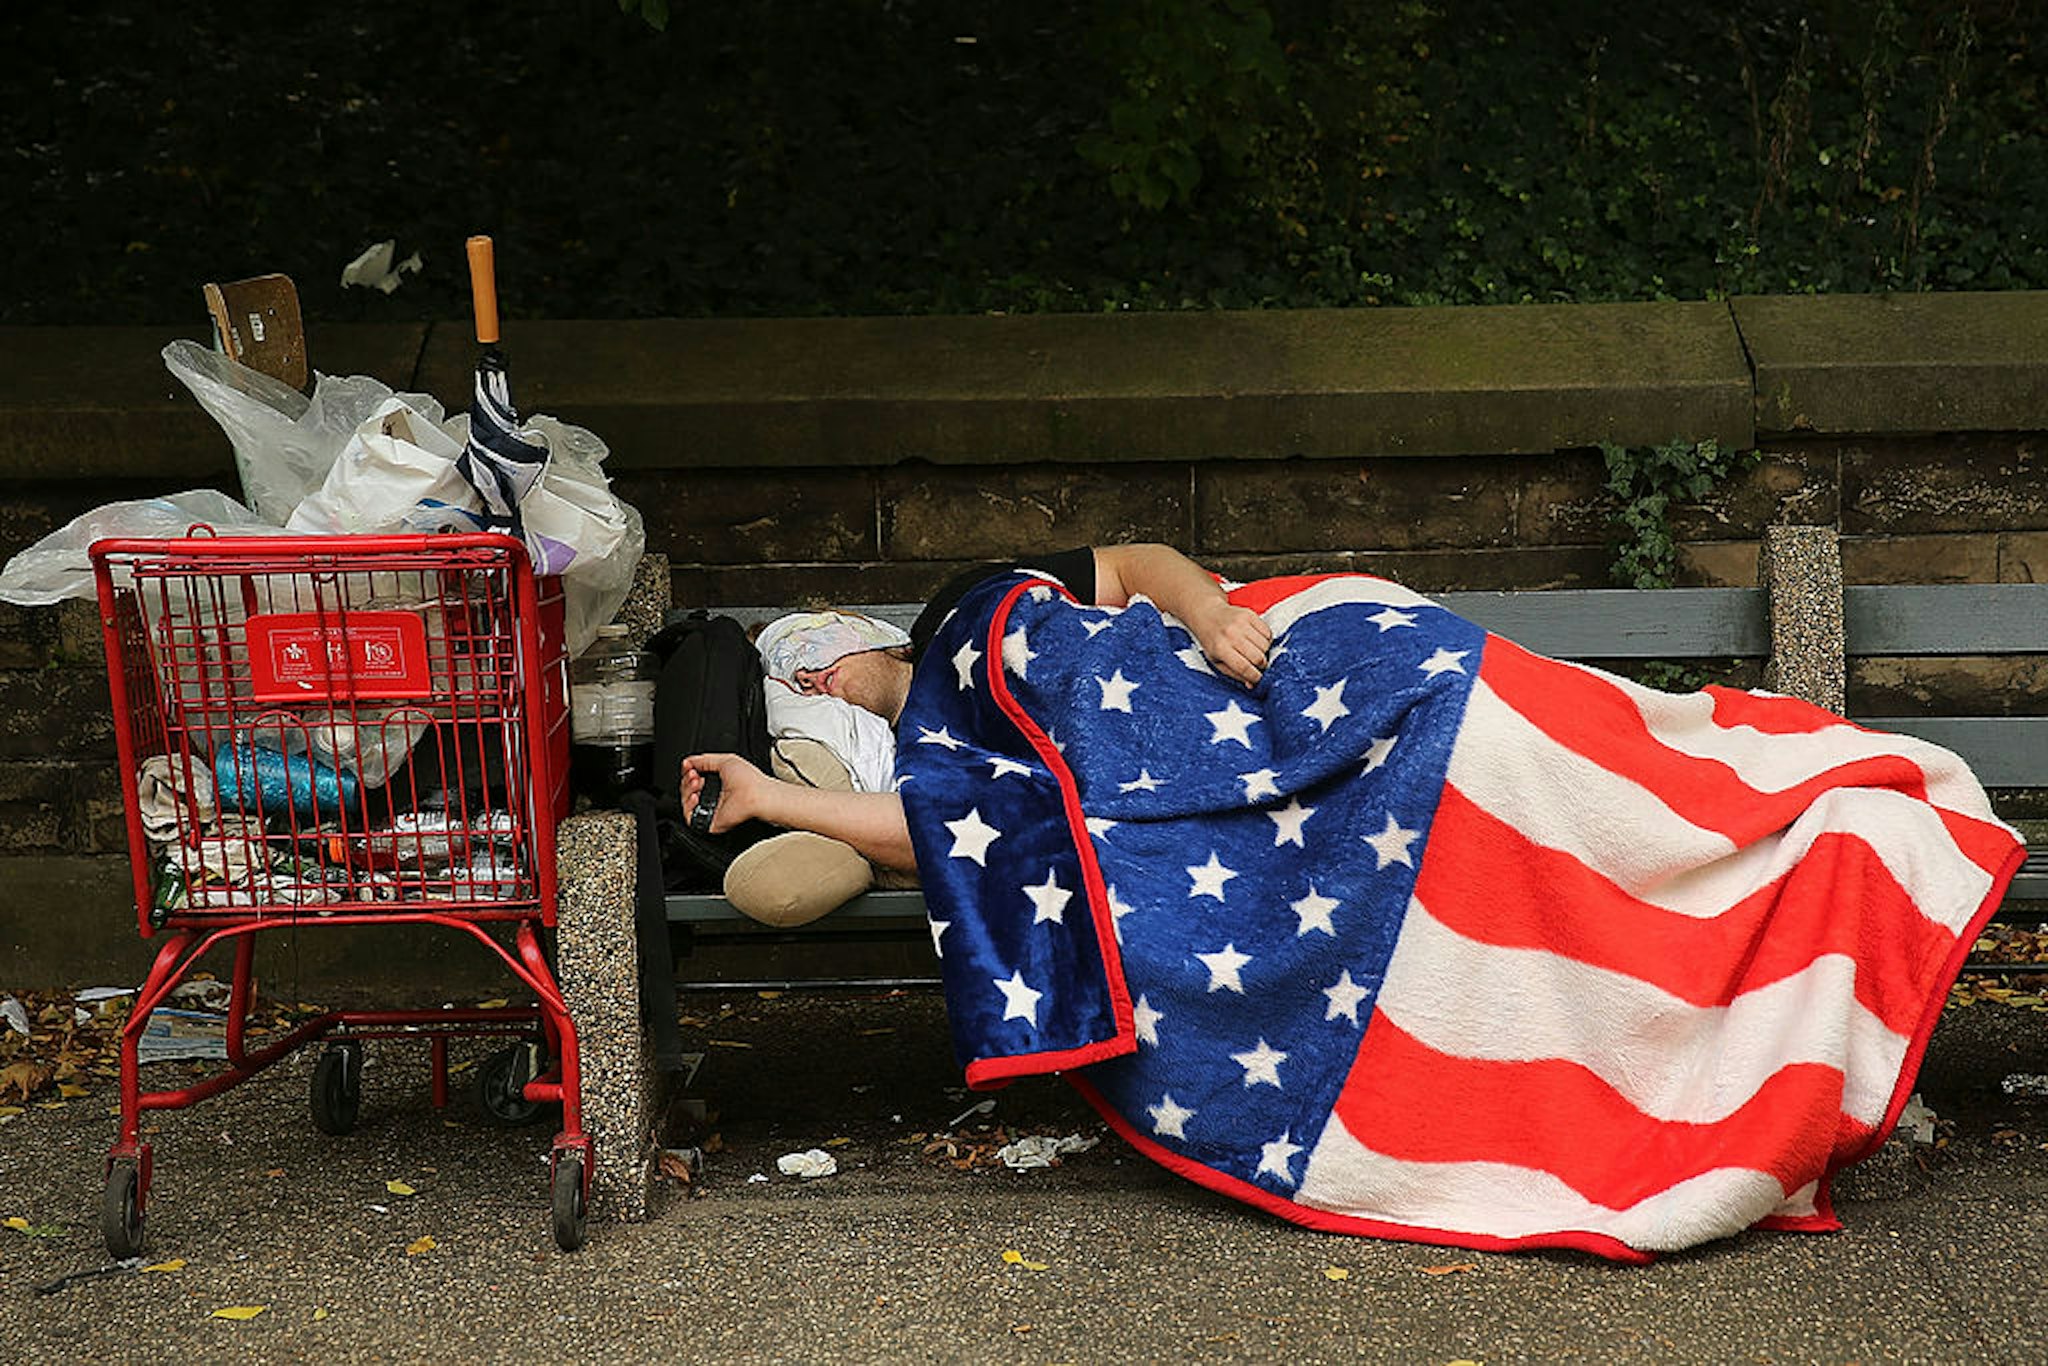 NEW YORK, NY - SEPTEMBER 10: A homeless man sleeps under an American Flag blanket on a park bench on September 10, 2013 in the Brooklyn borough of New York City. As of June 2013, there were an all-time record of 50,900 homeless people, including 12,100 homeless families with 21,300 homeless children homeless in New York City. (Photo by Spencer Platt/Getty Images)